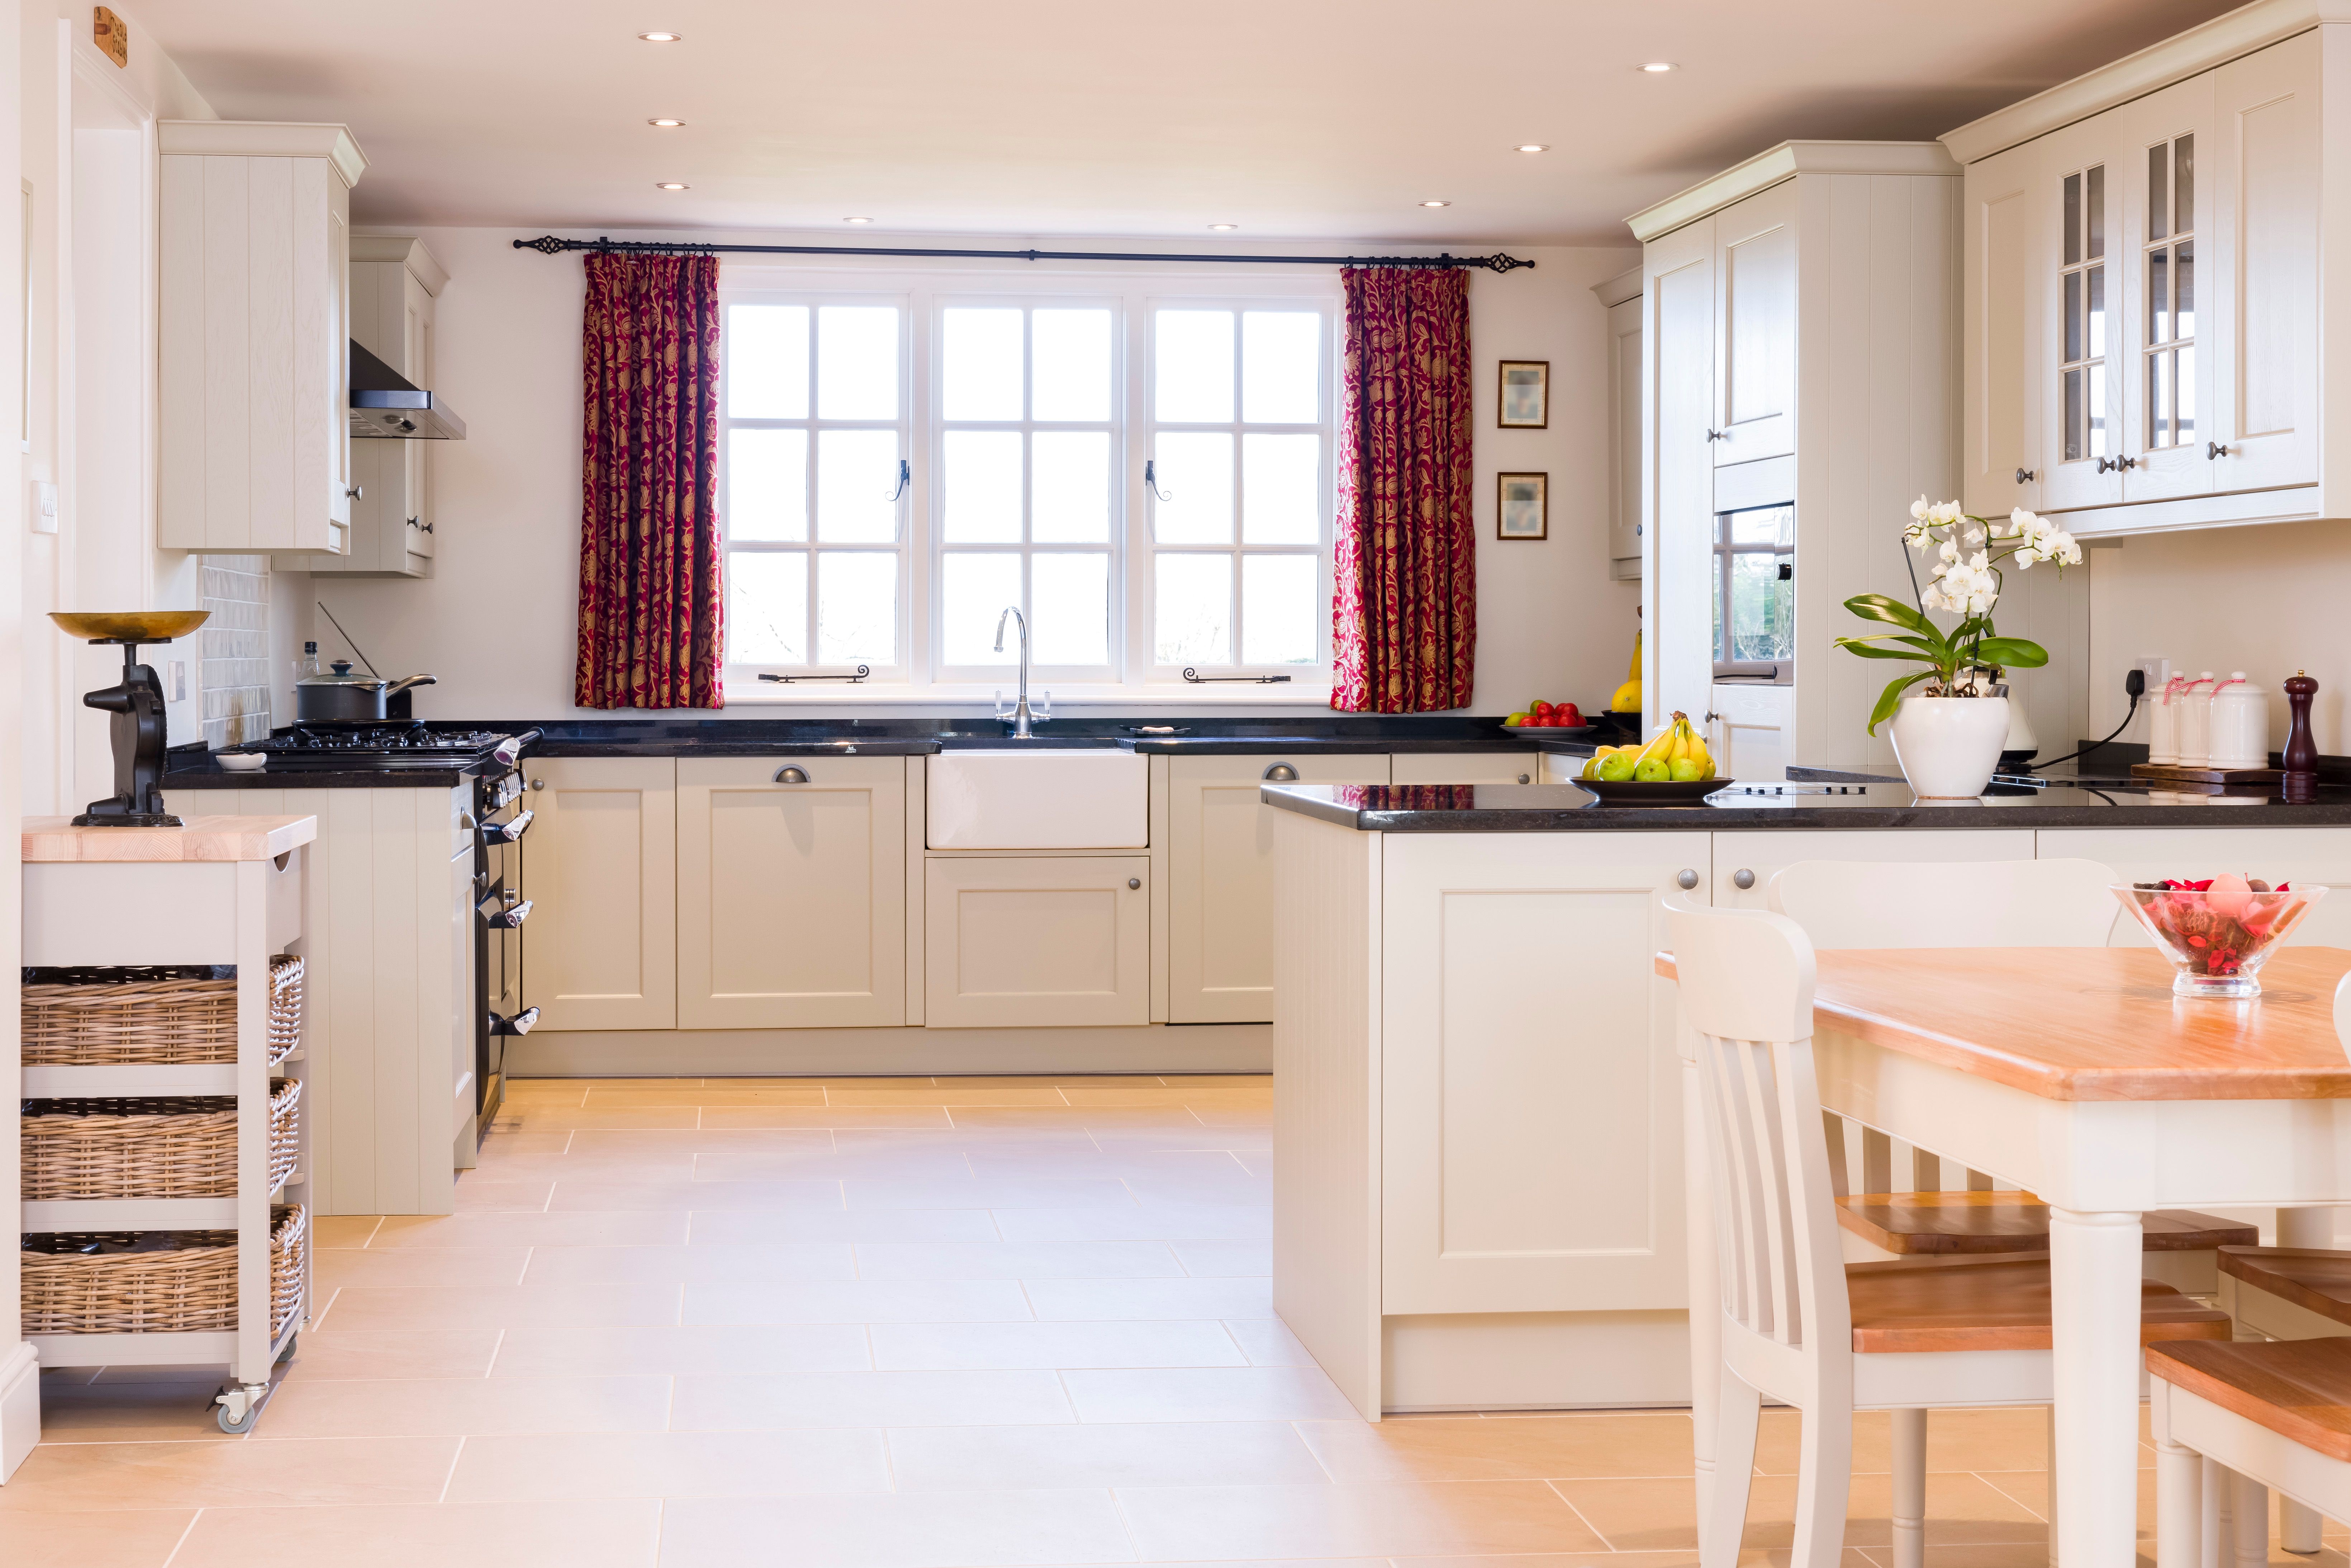 Handles - the finishing touch! - Eternal Kitchens